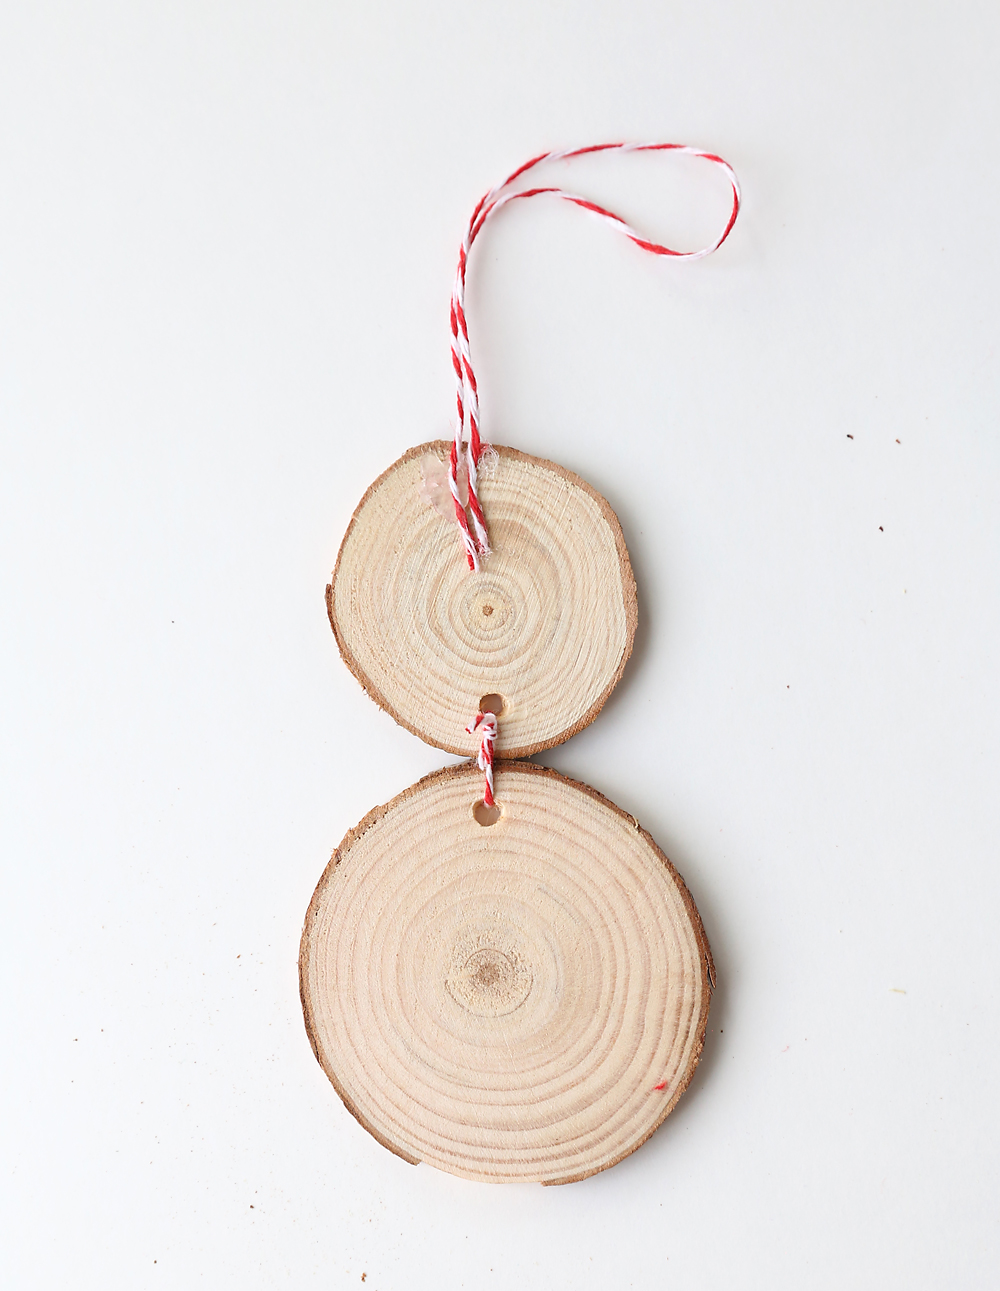 Two wood slices tied together with a loop of twine at the top